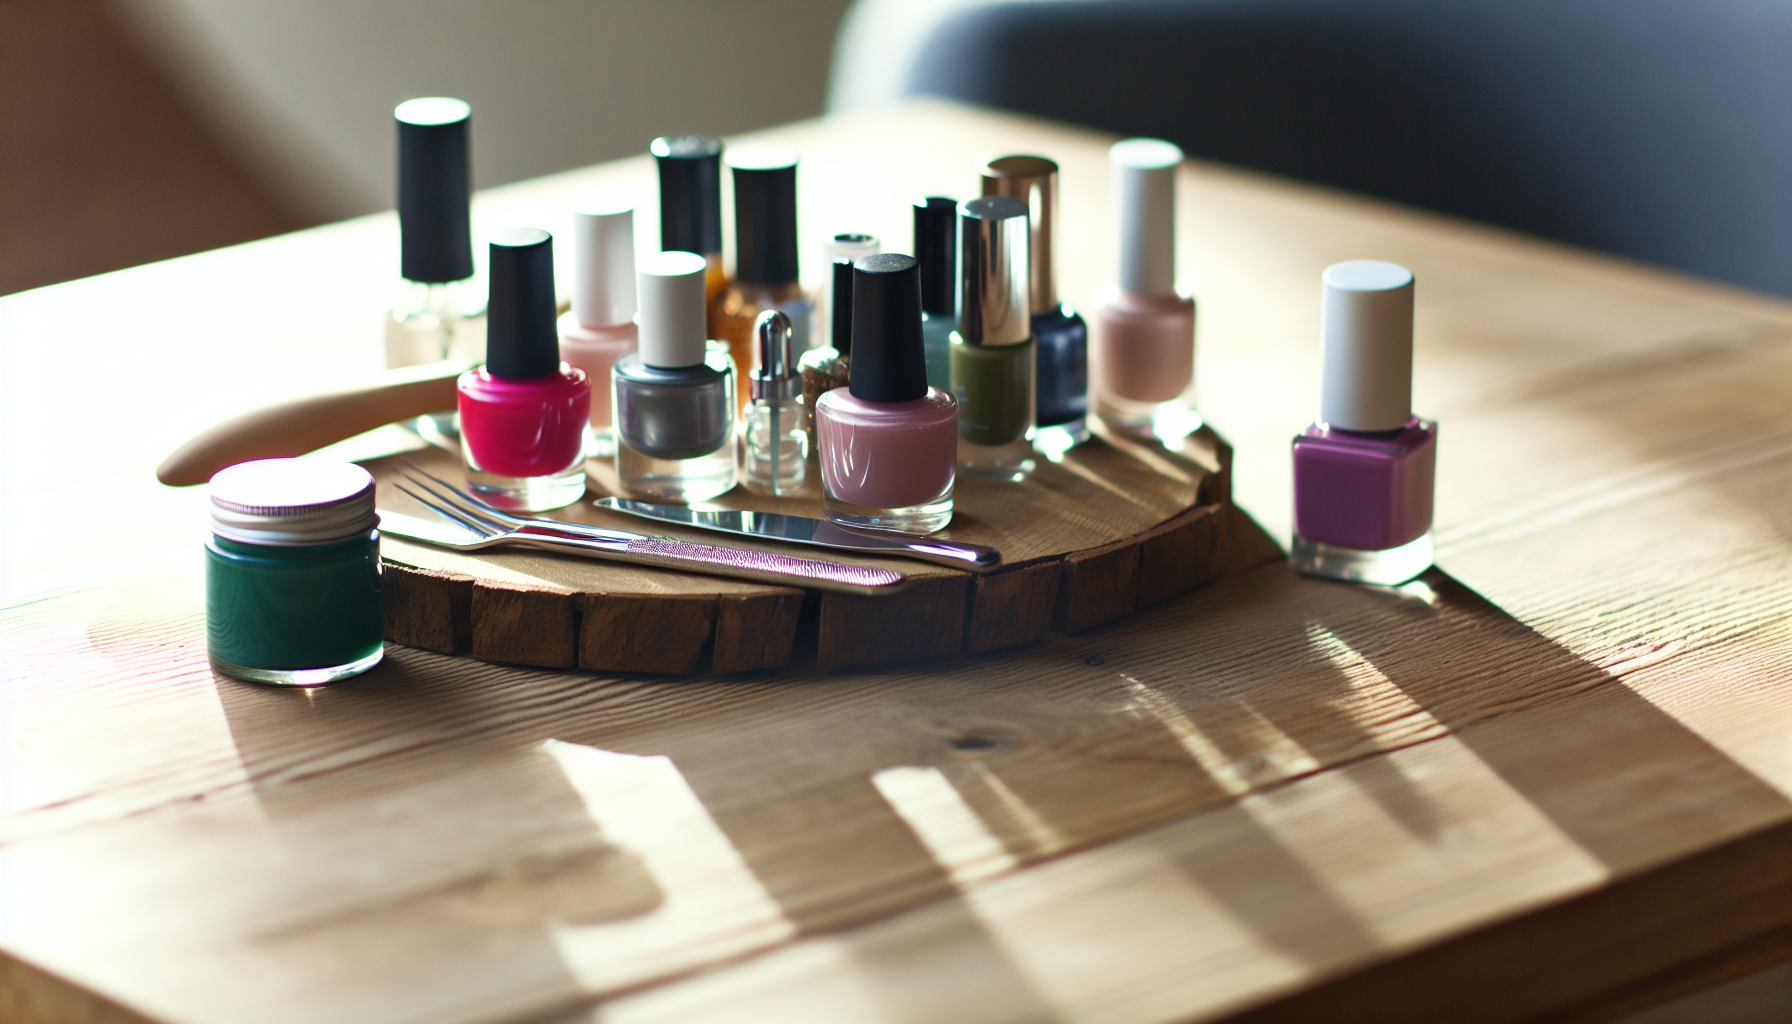 Organic nail care products on a wooden table